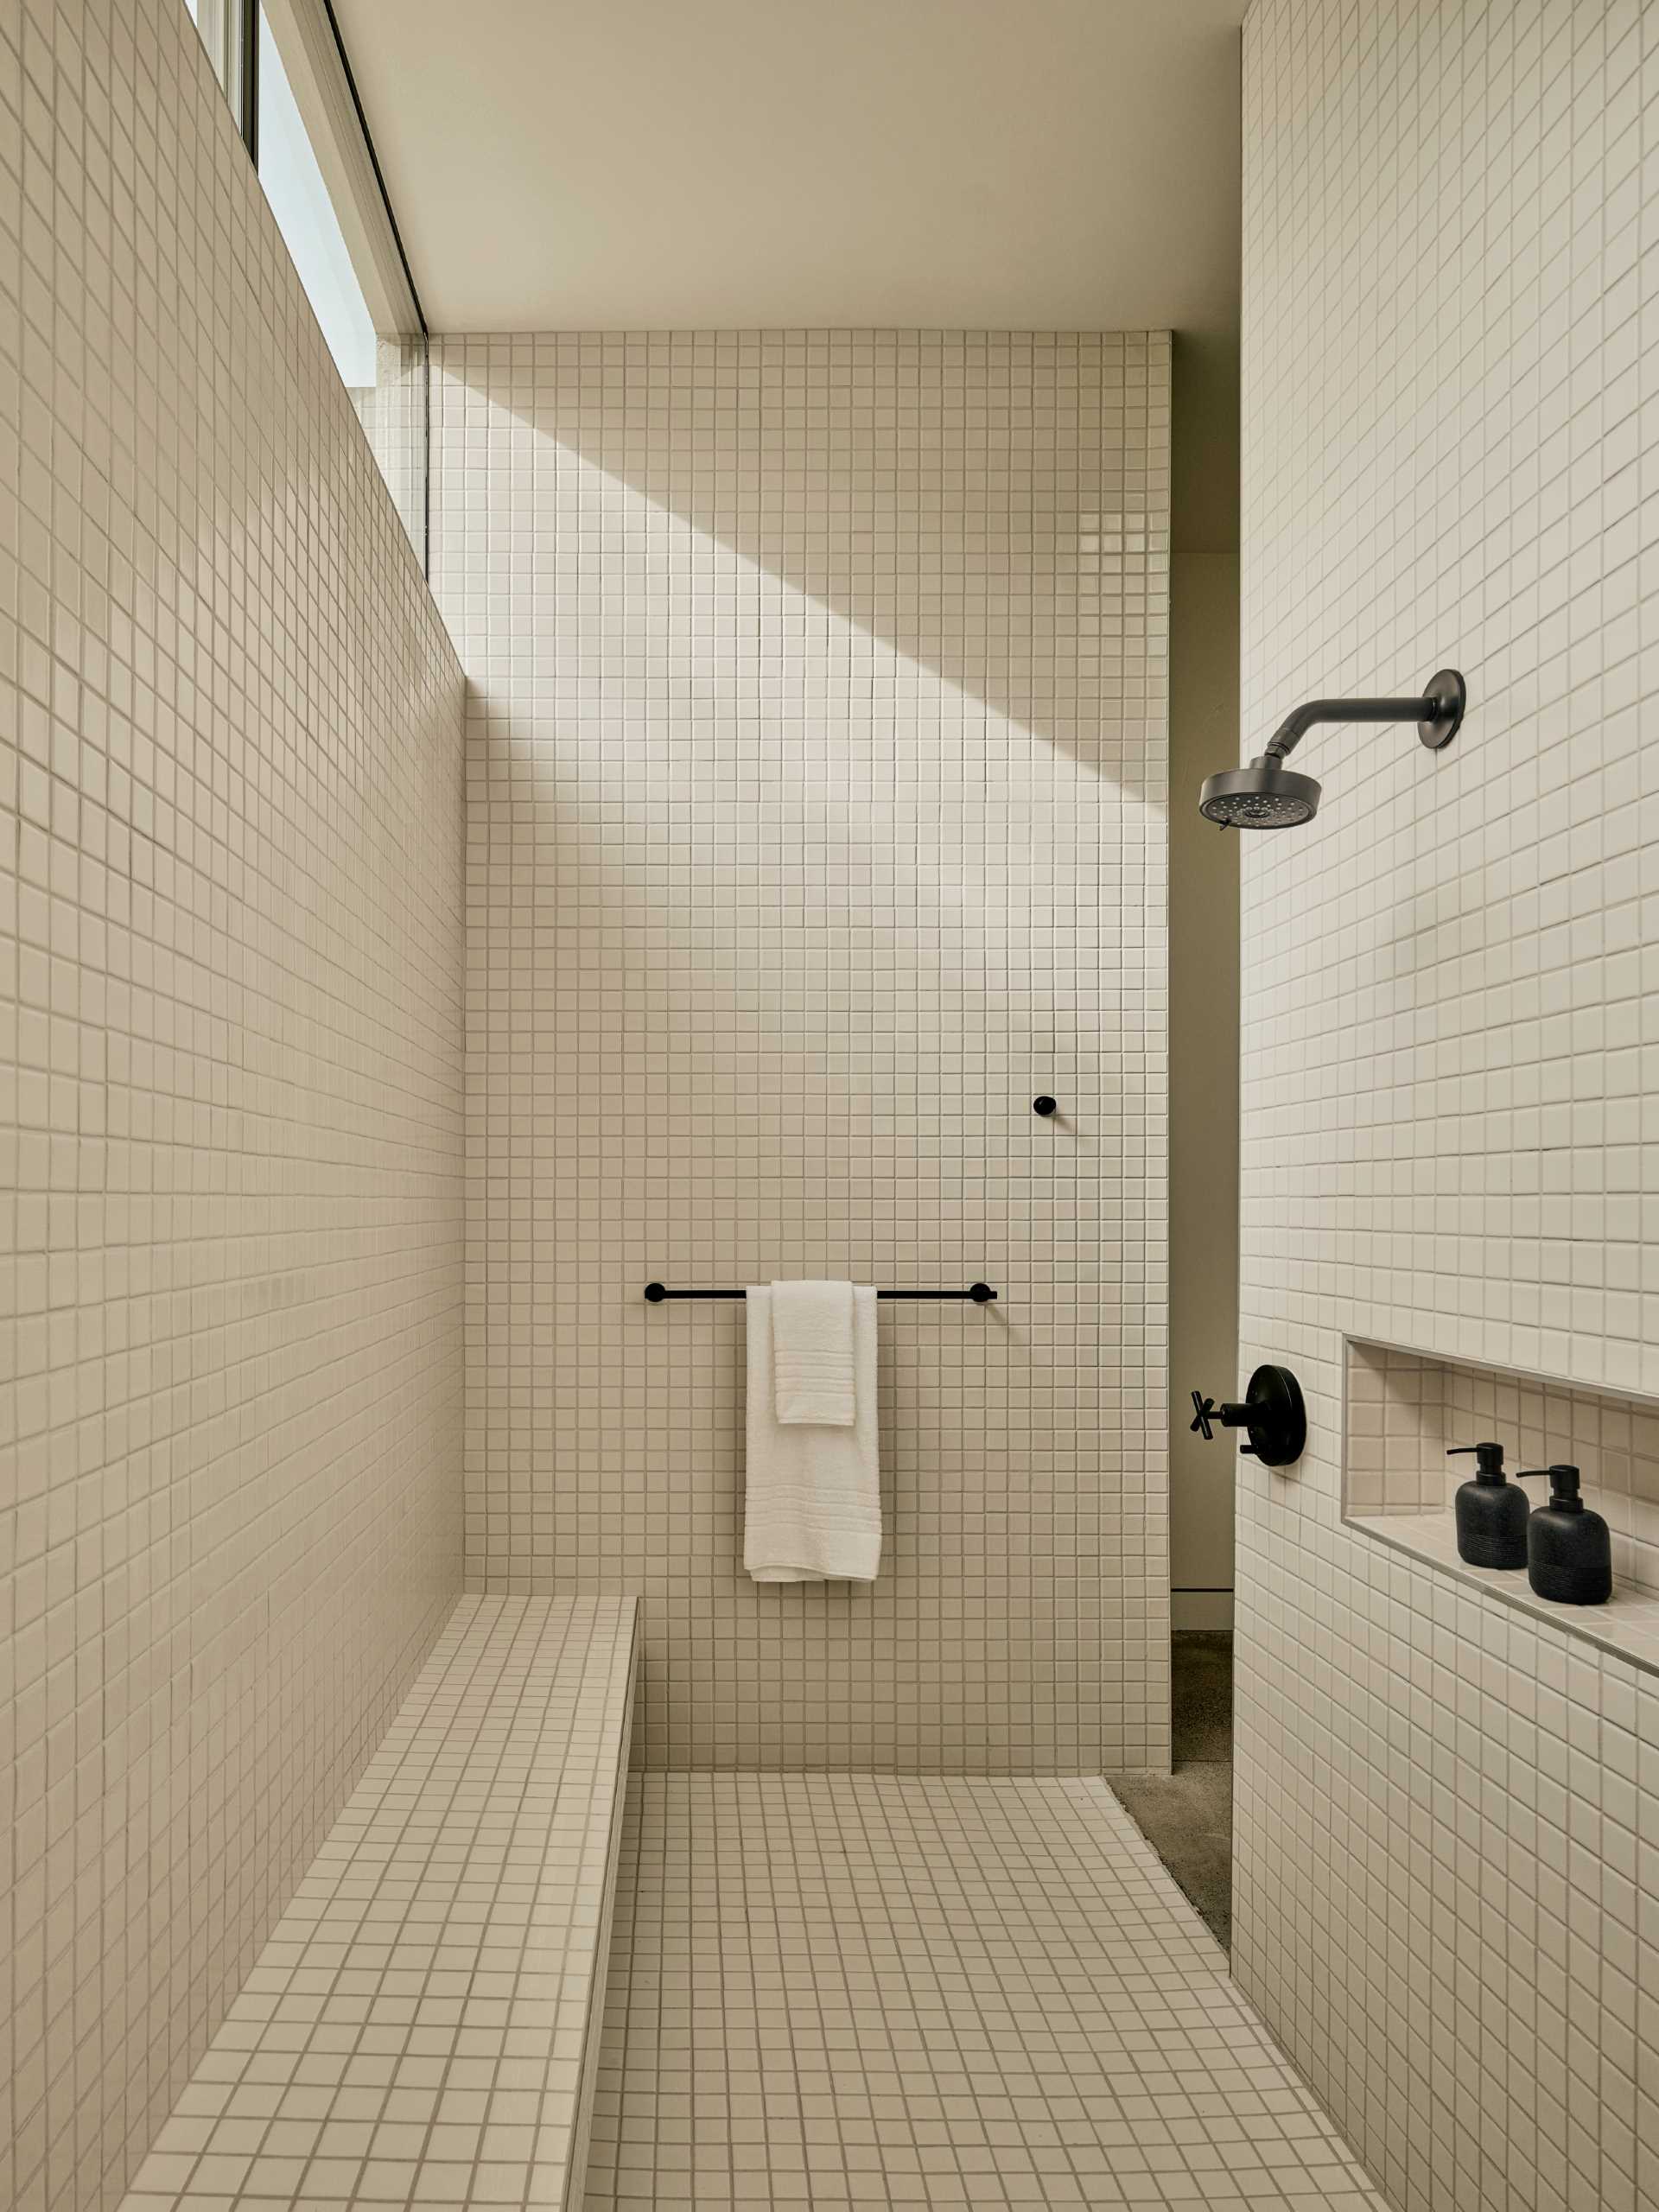 Square tiles cover the walls, floors, and bench in this shower that also includes a shelving nice.